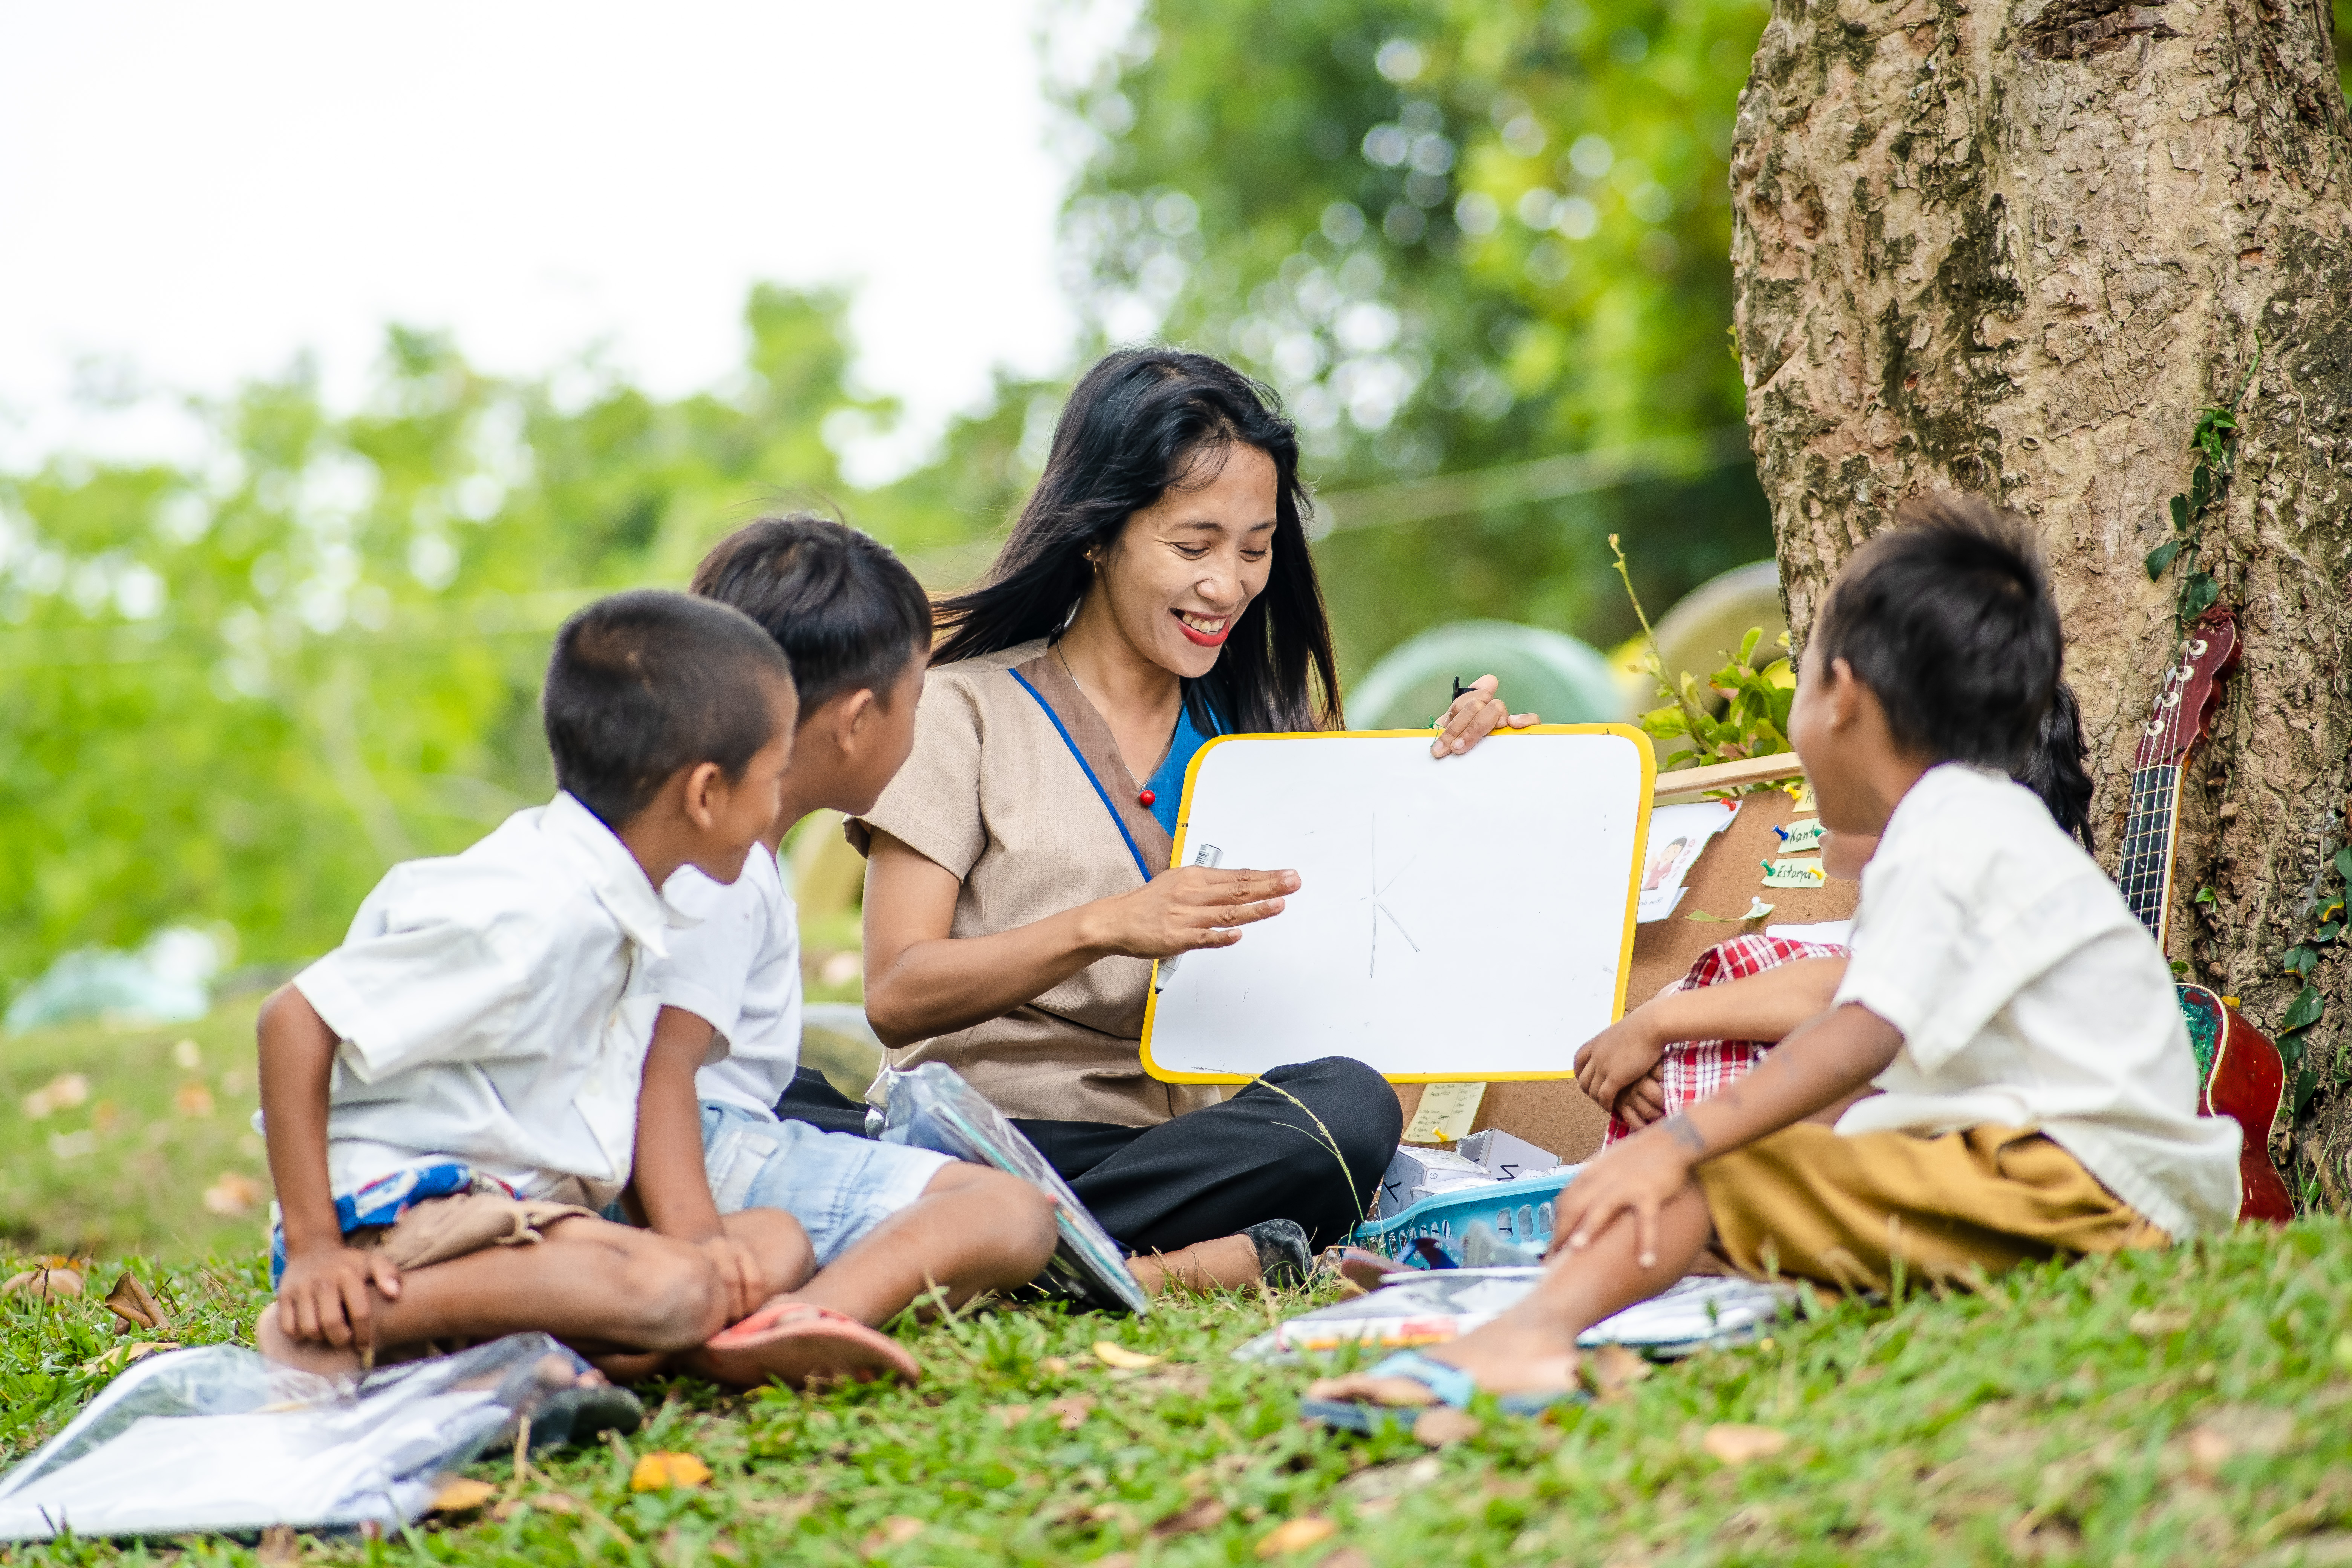 A Teacher Fellow reading to three students outdoors.